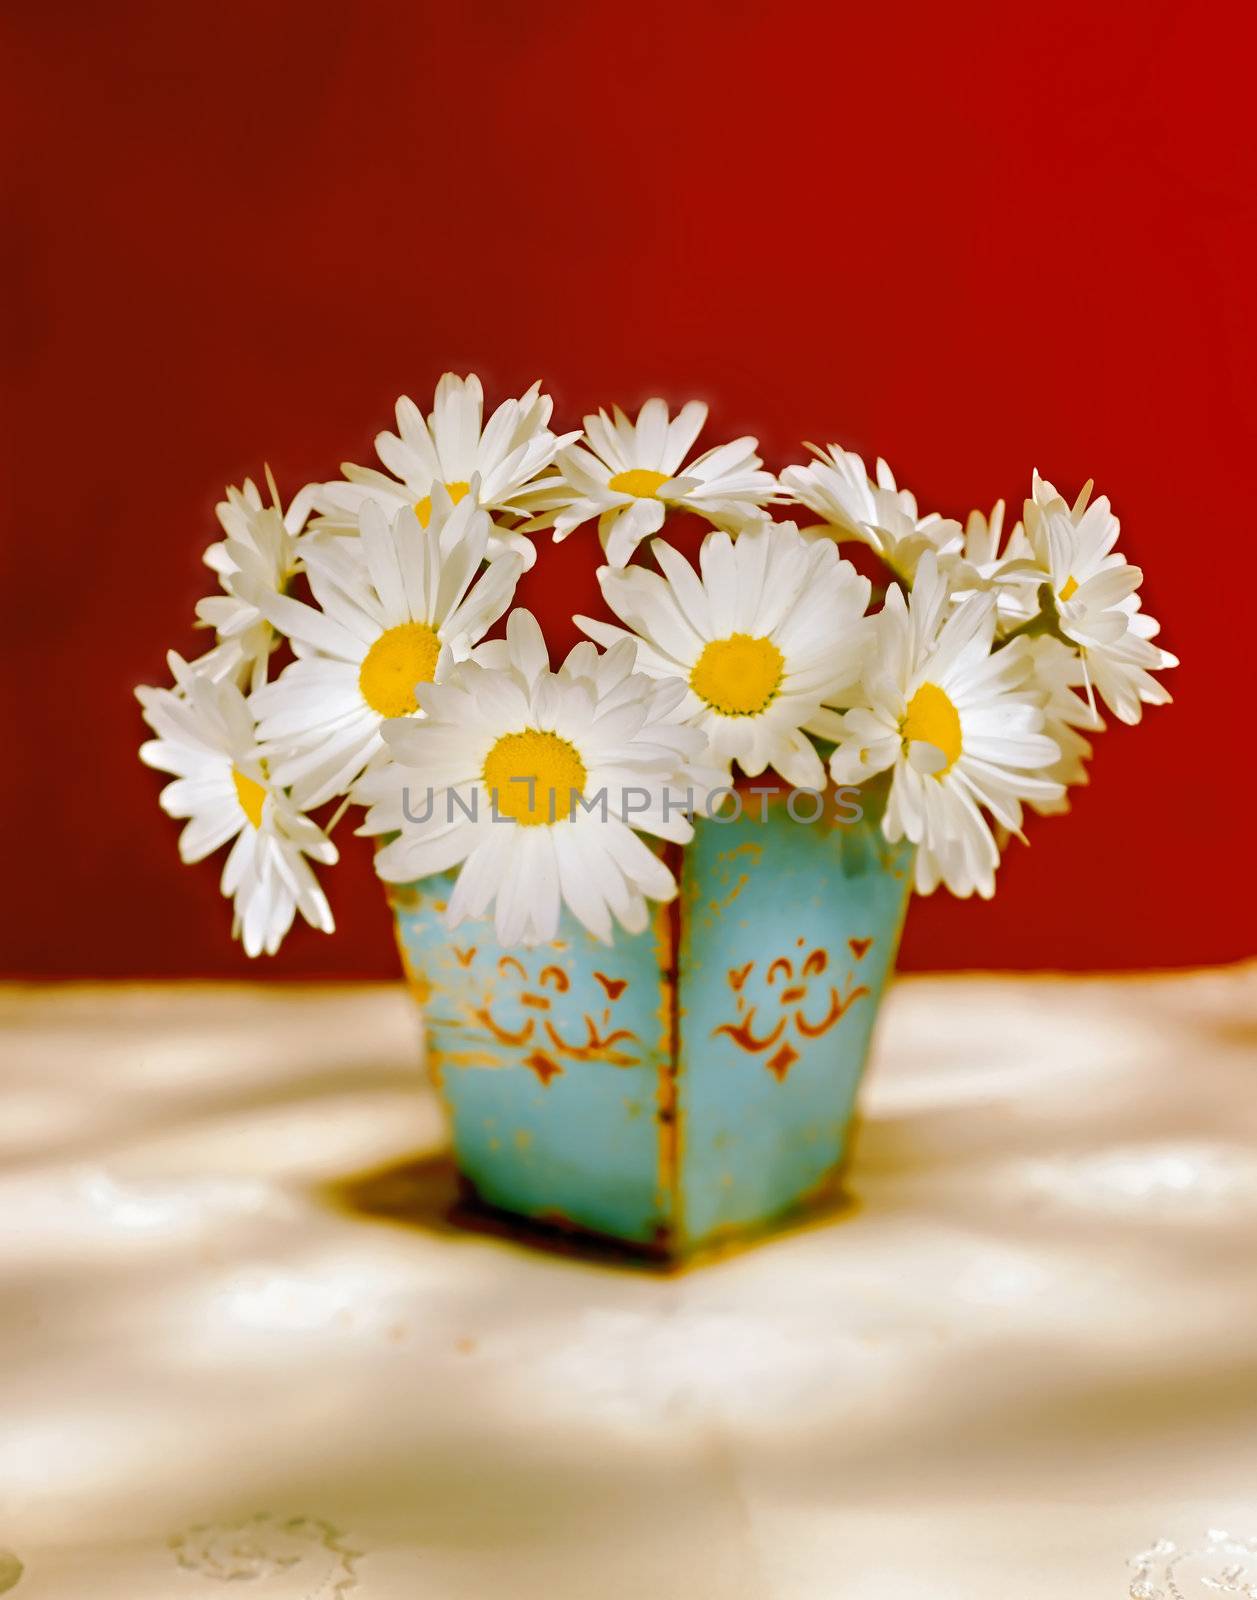 bouquet of white daisies in an old vase and red background